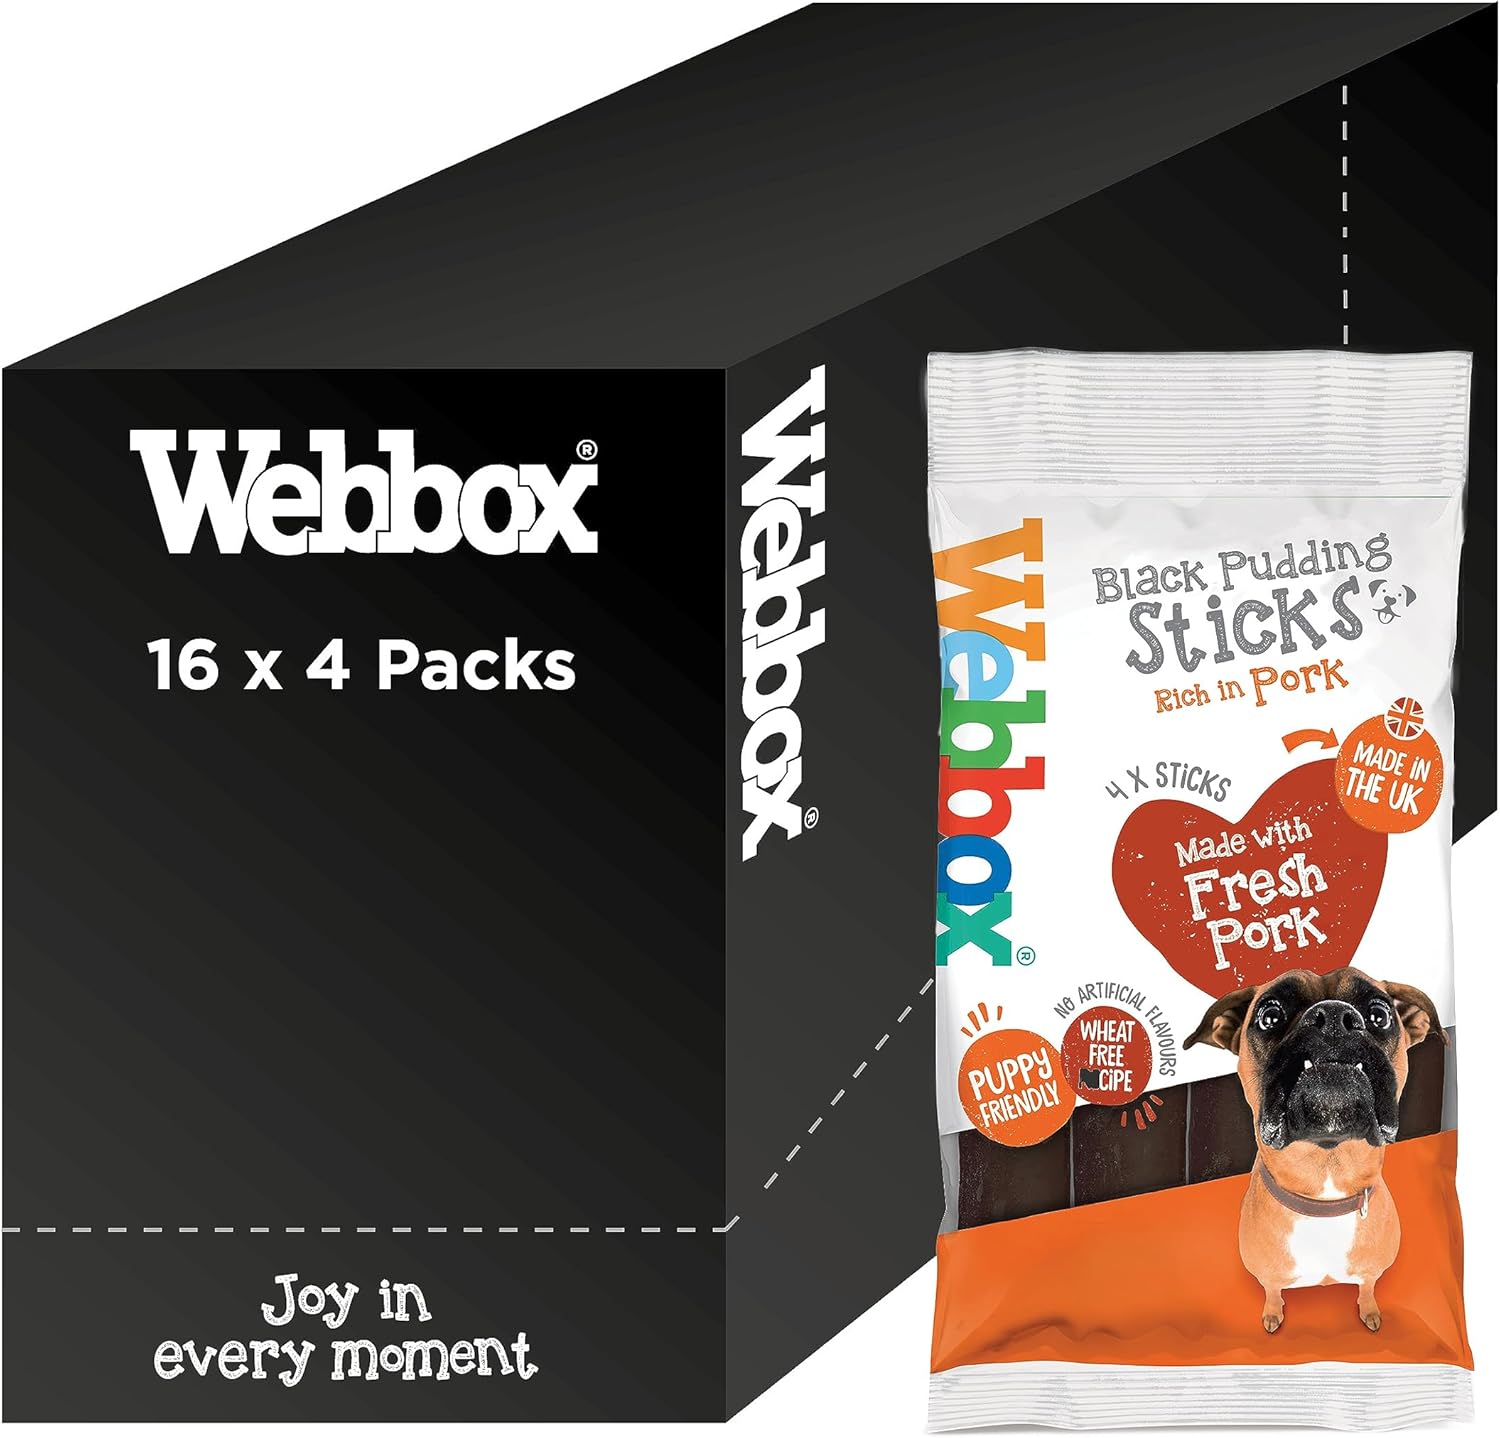 Webbox Black Pudding Sticks Dog Treats - Made with Fresh Pork, Puppy Friendly, Wheat Free Recipe, No Artificial Flavours, Made in the UK (16 x 4 Packs)